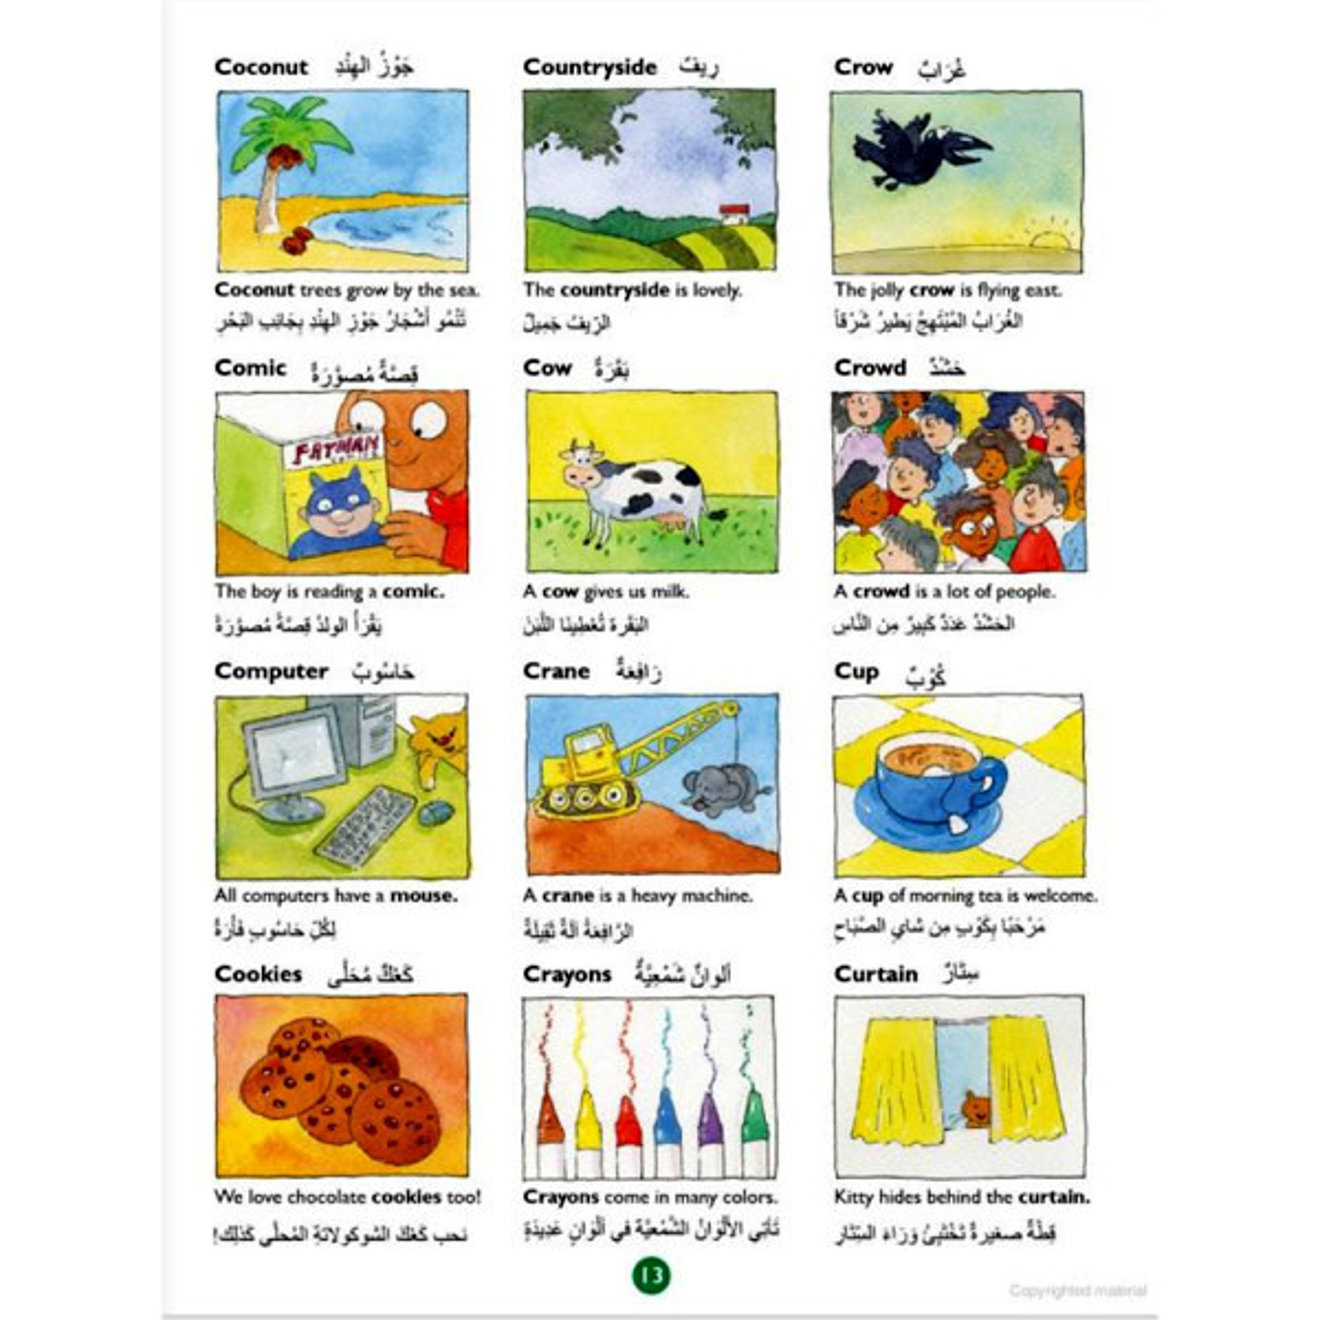 Arabic Picture Dictionary for Kids